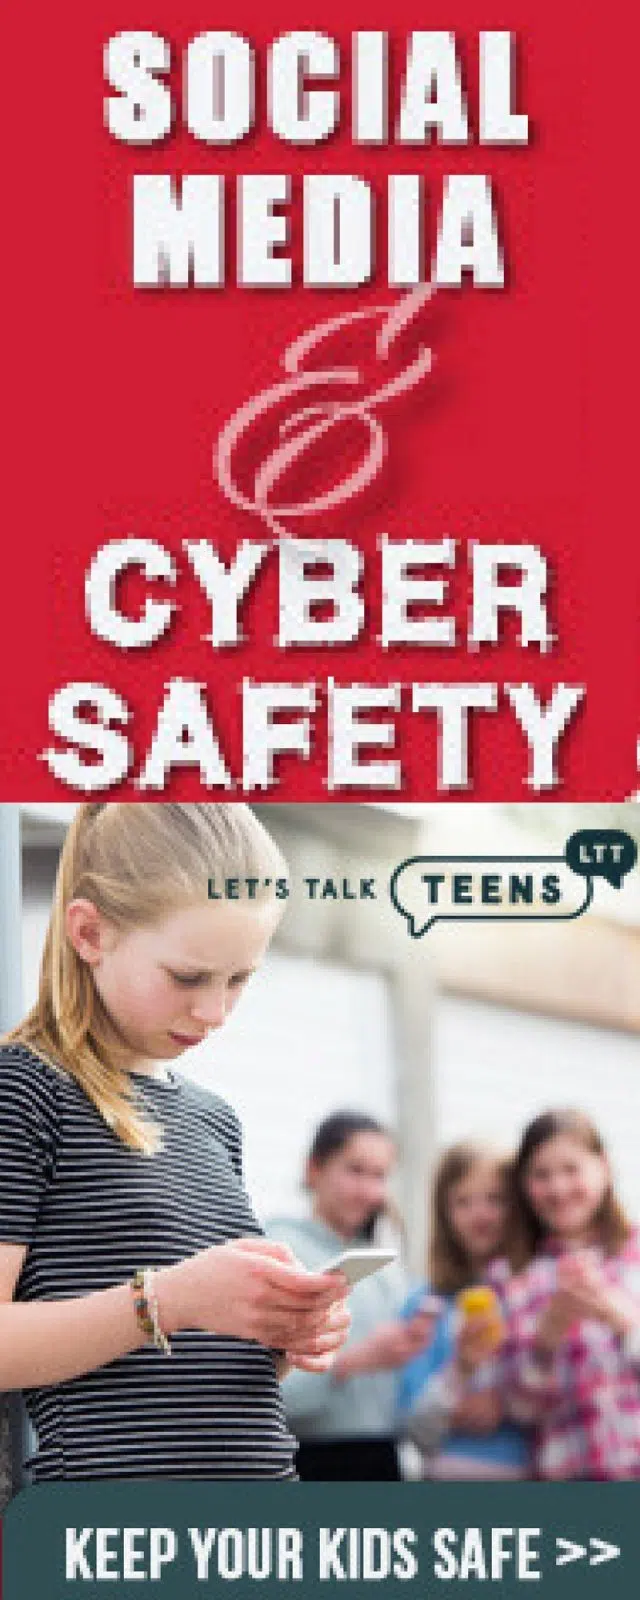 Internet Safety for Kids and Teens - Keep your child safe on social media and the internet. #socialmedia #teensandtechnology #cyberbullying